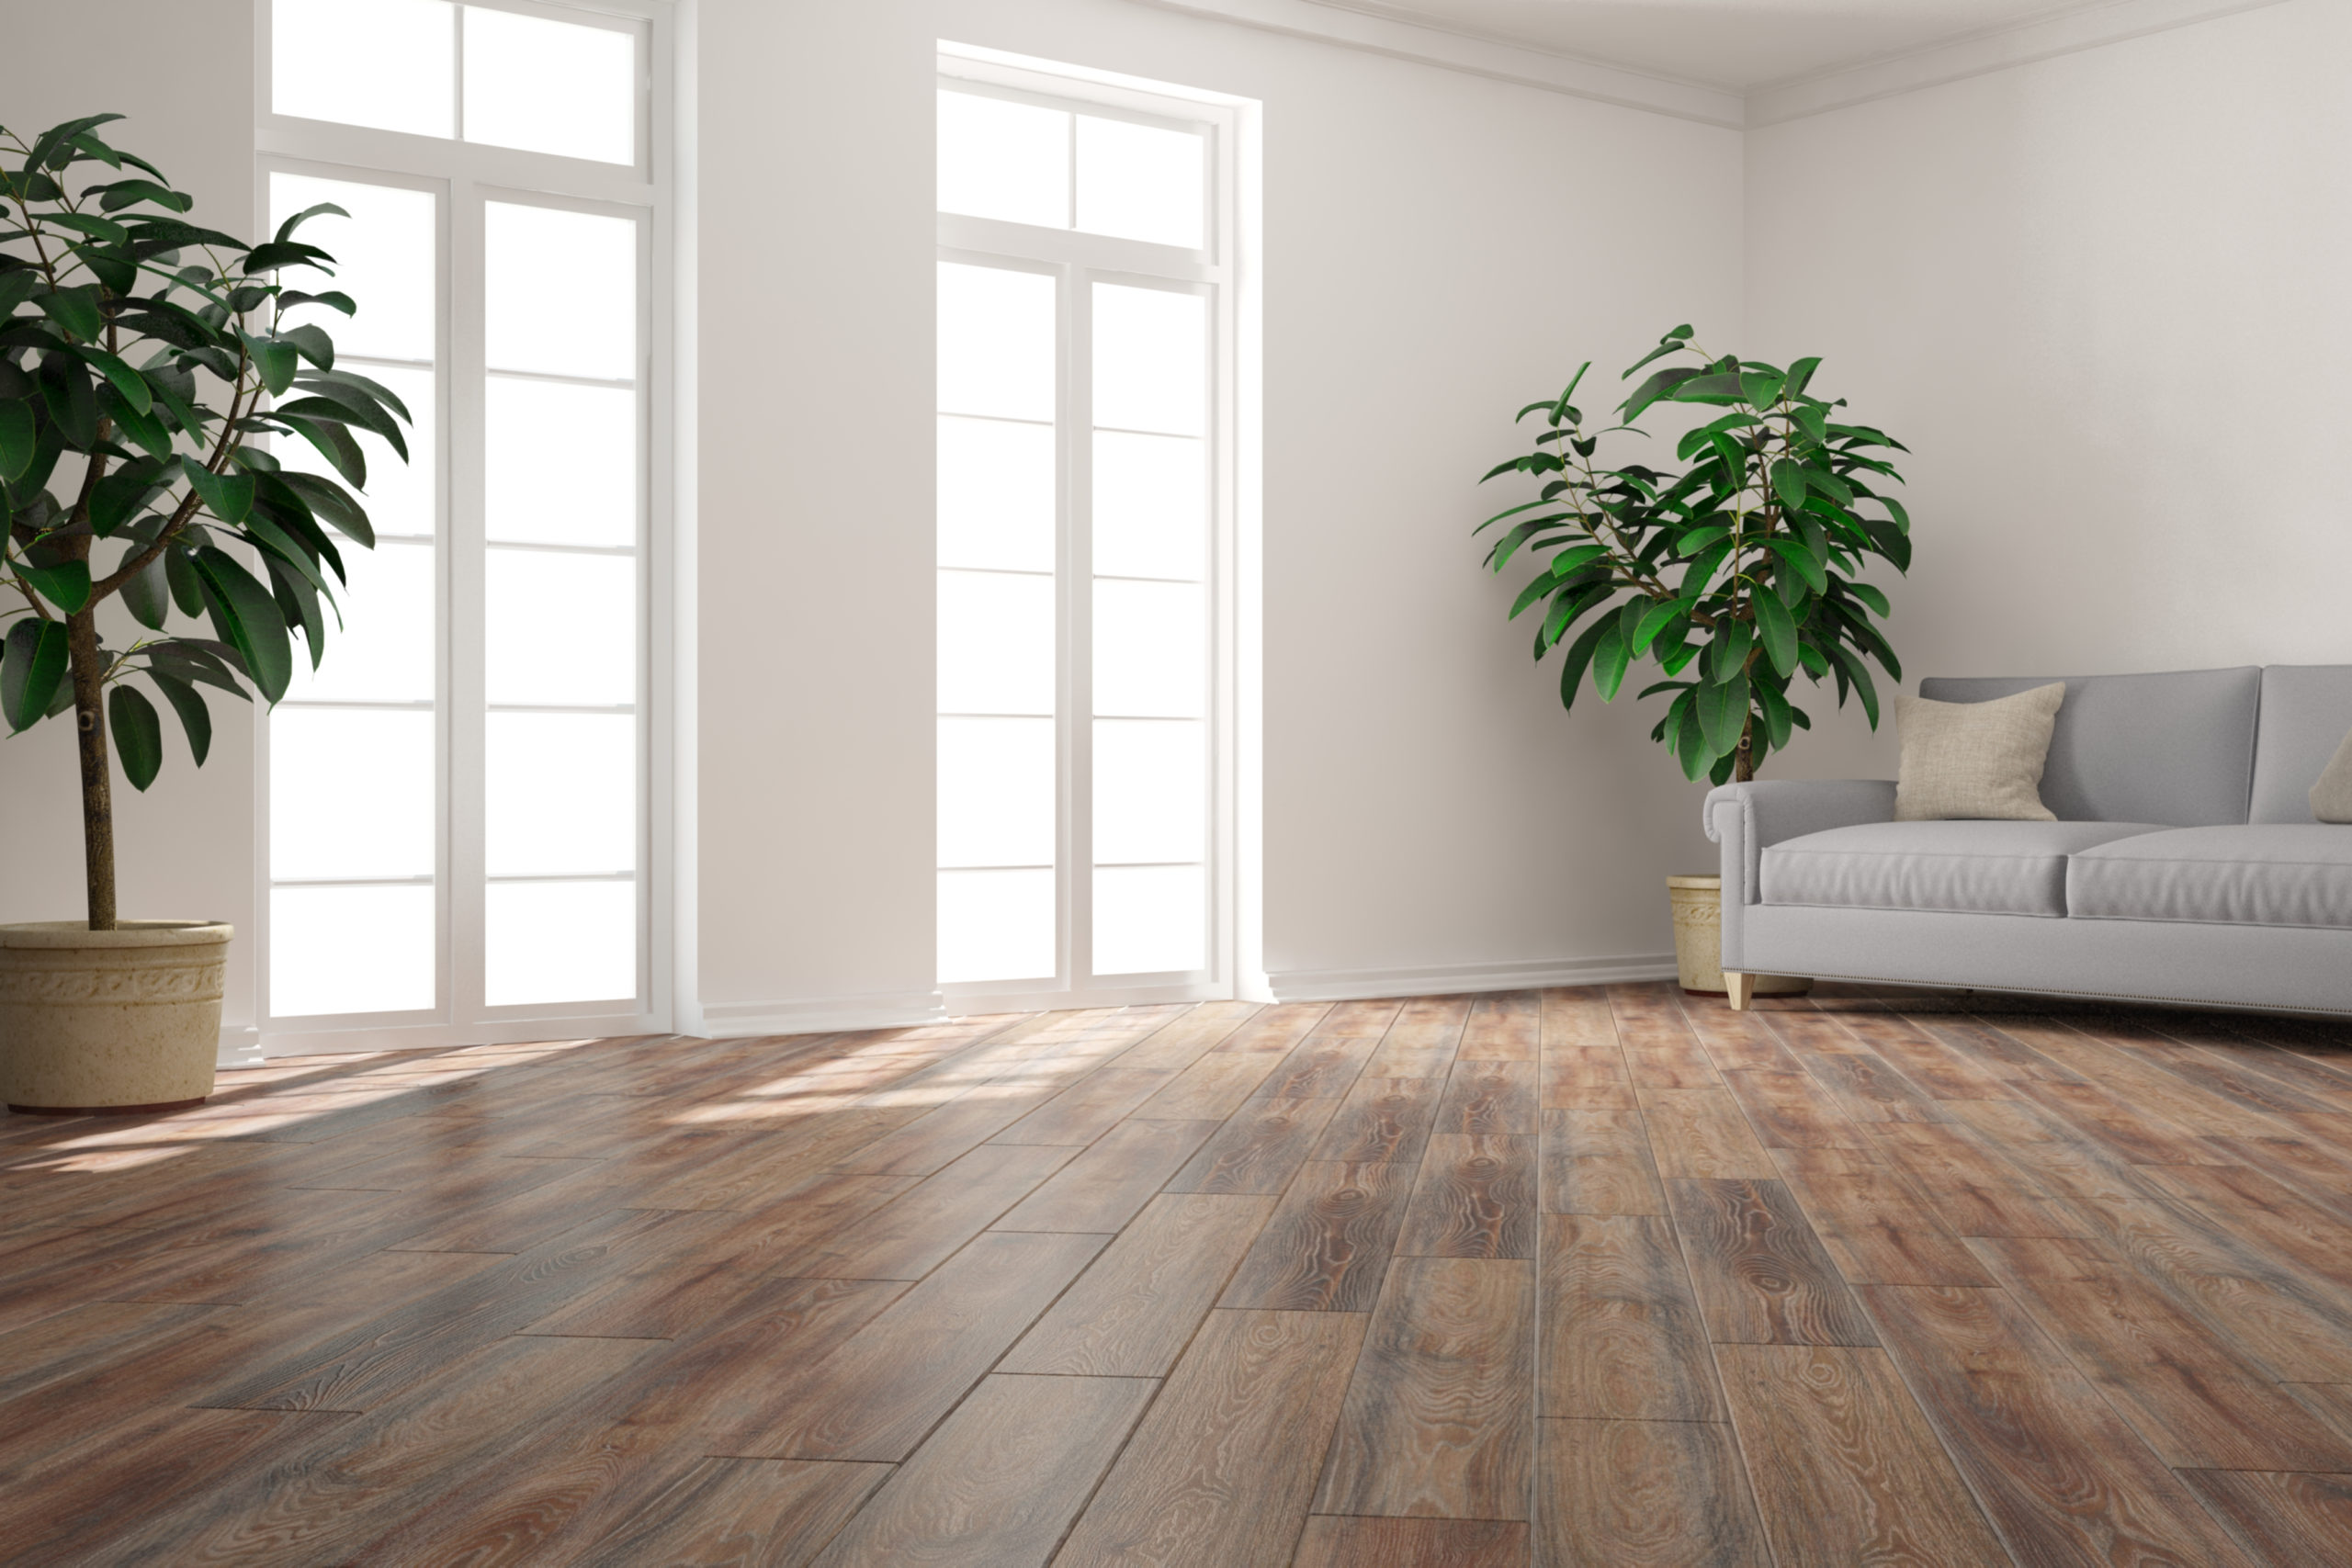 Armstrong Laminate Flooring Review, Armstrong Laminate Plank Flooring